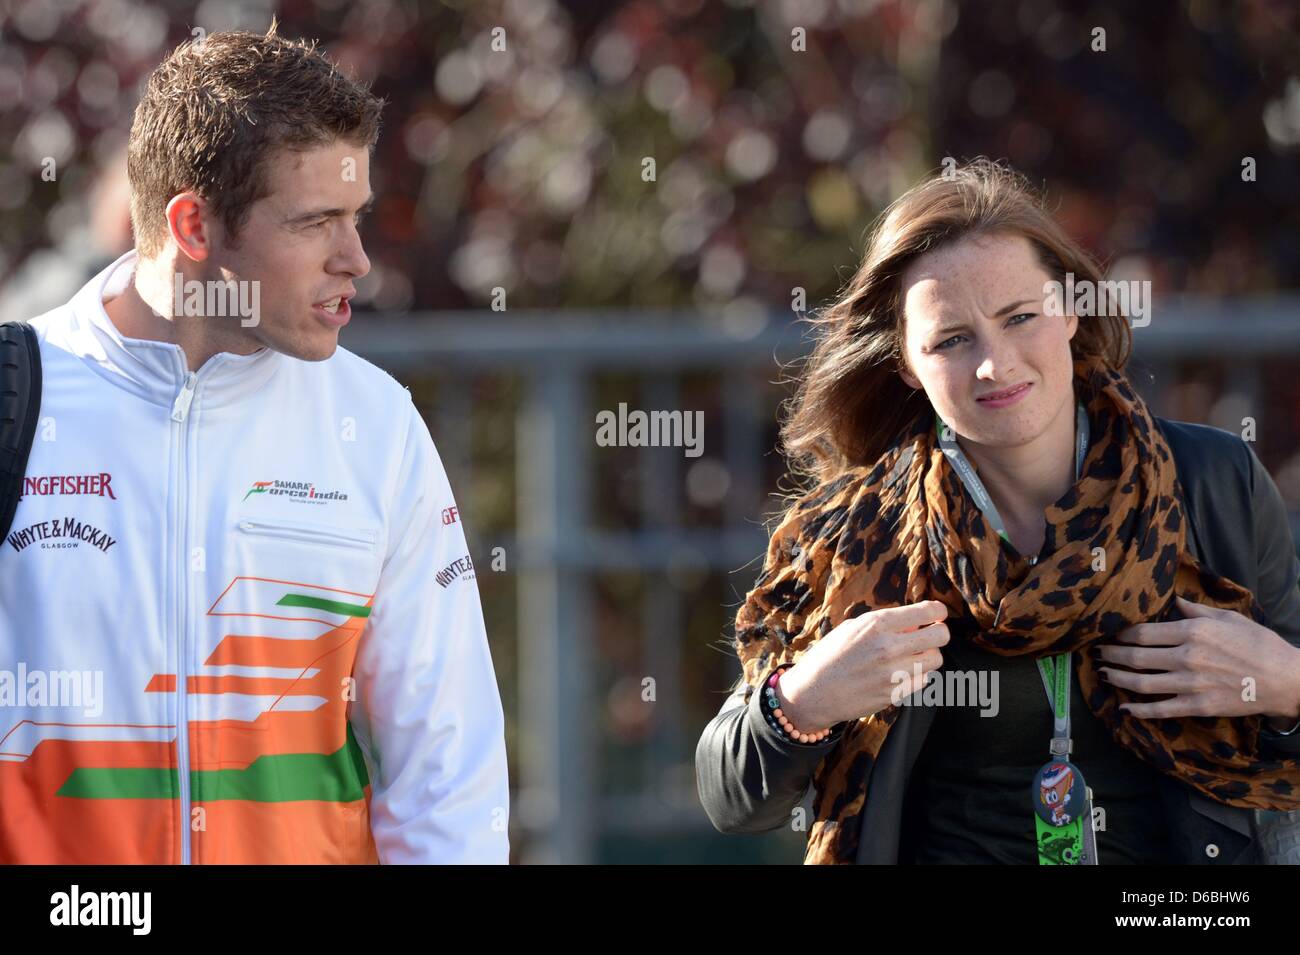 British Formula One driver Paul Resta of Force India and his girlfriend Laura Jordan arrive paddock at the race track Circuit de Spa-Francorchamps near Spa, Belgium, 01 September 2012. The